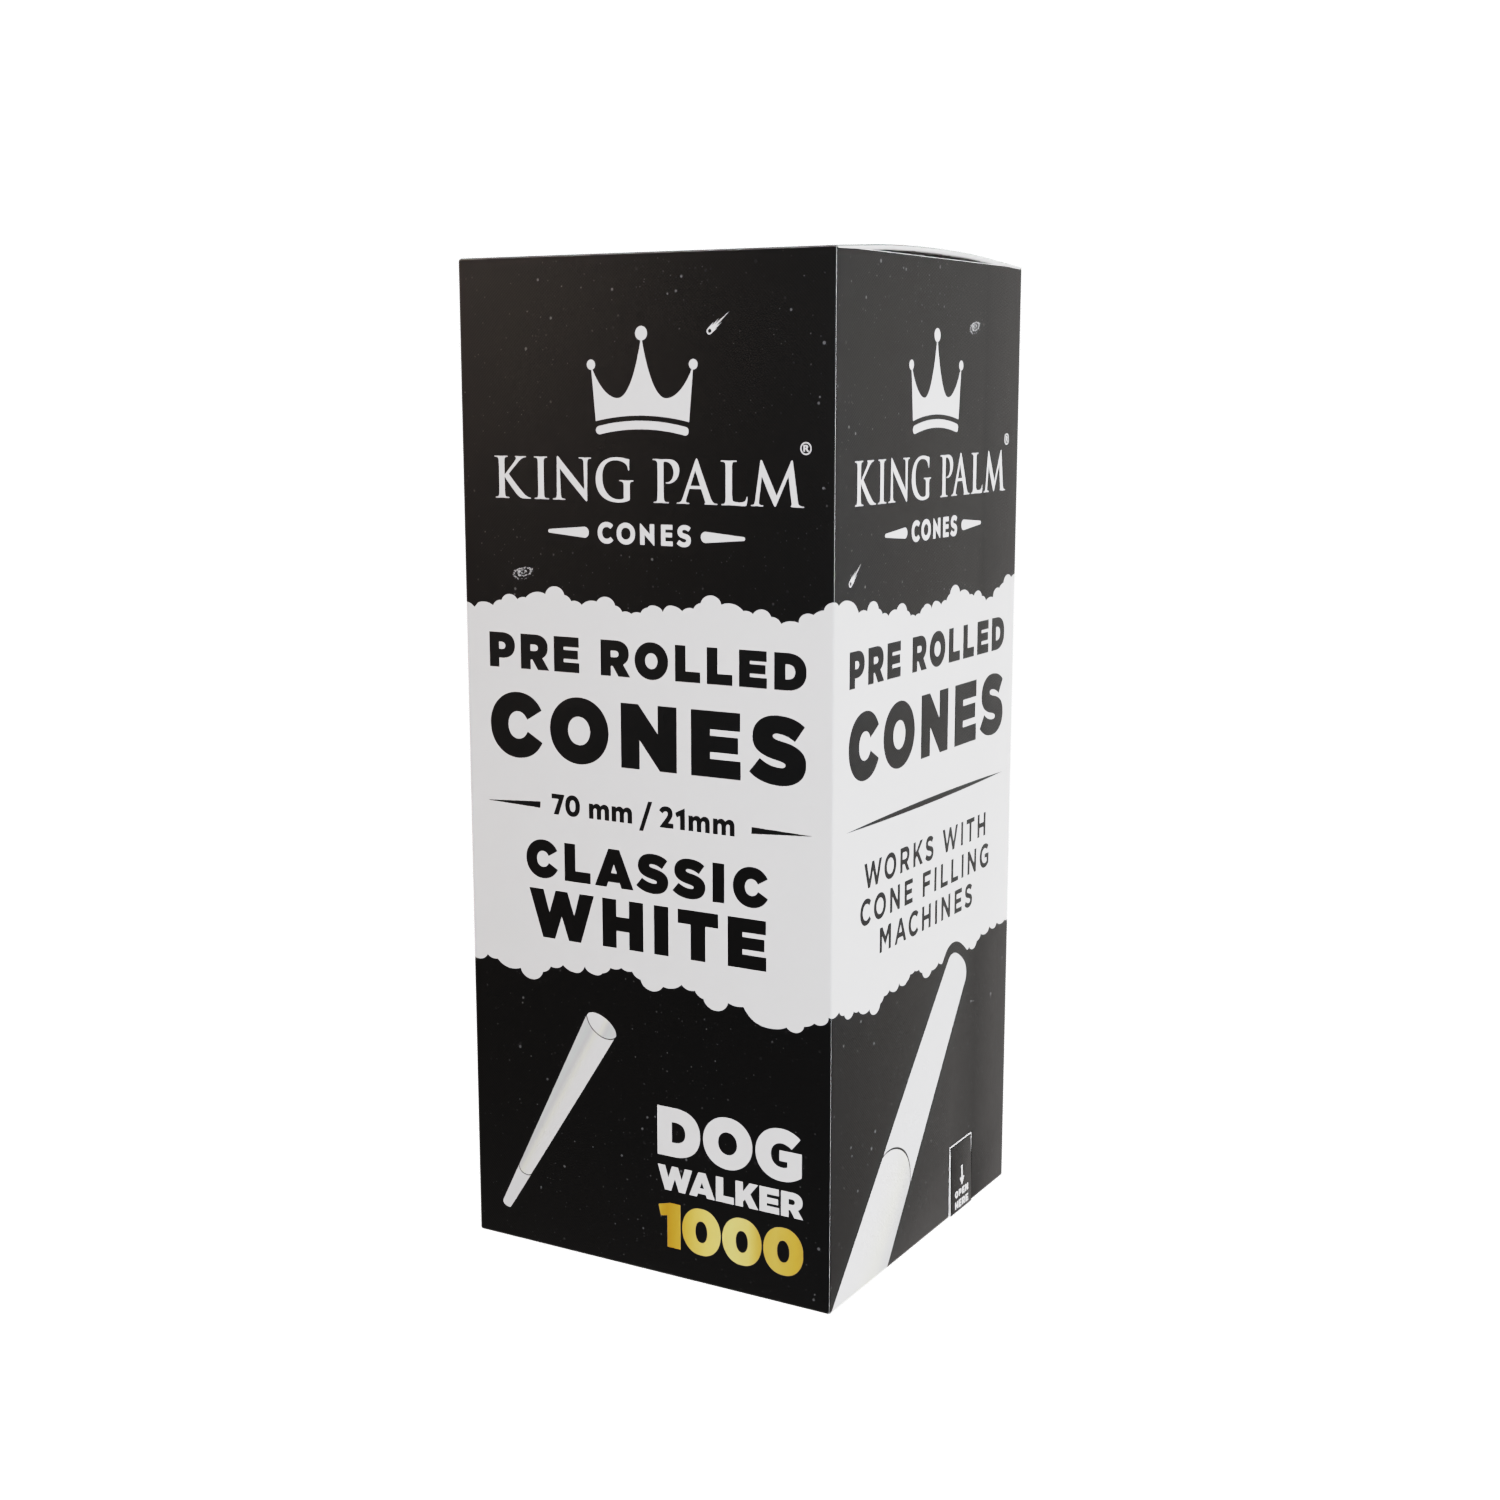 1000 Classic White Paper Cones – Dog Walker King Palm Best Price